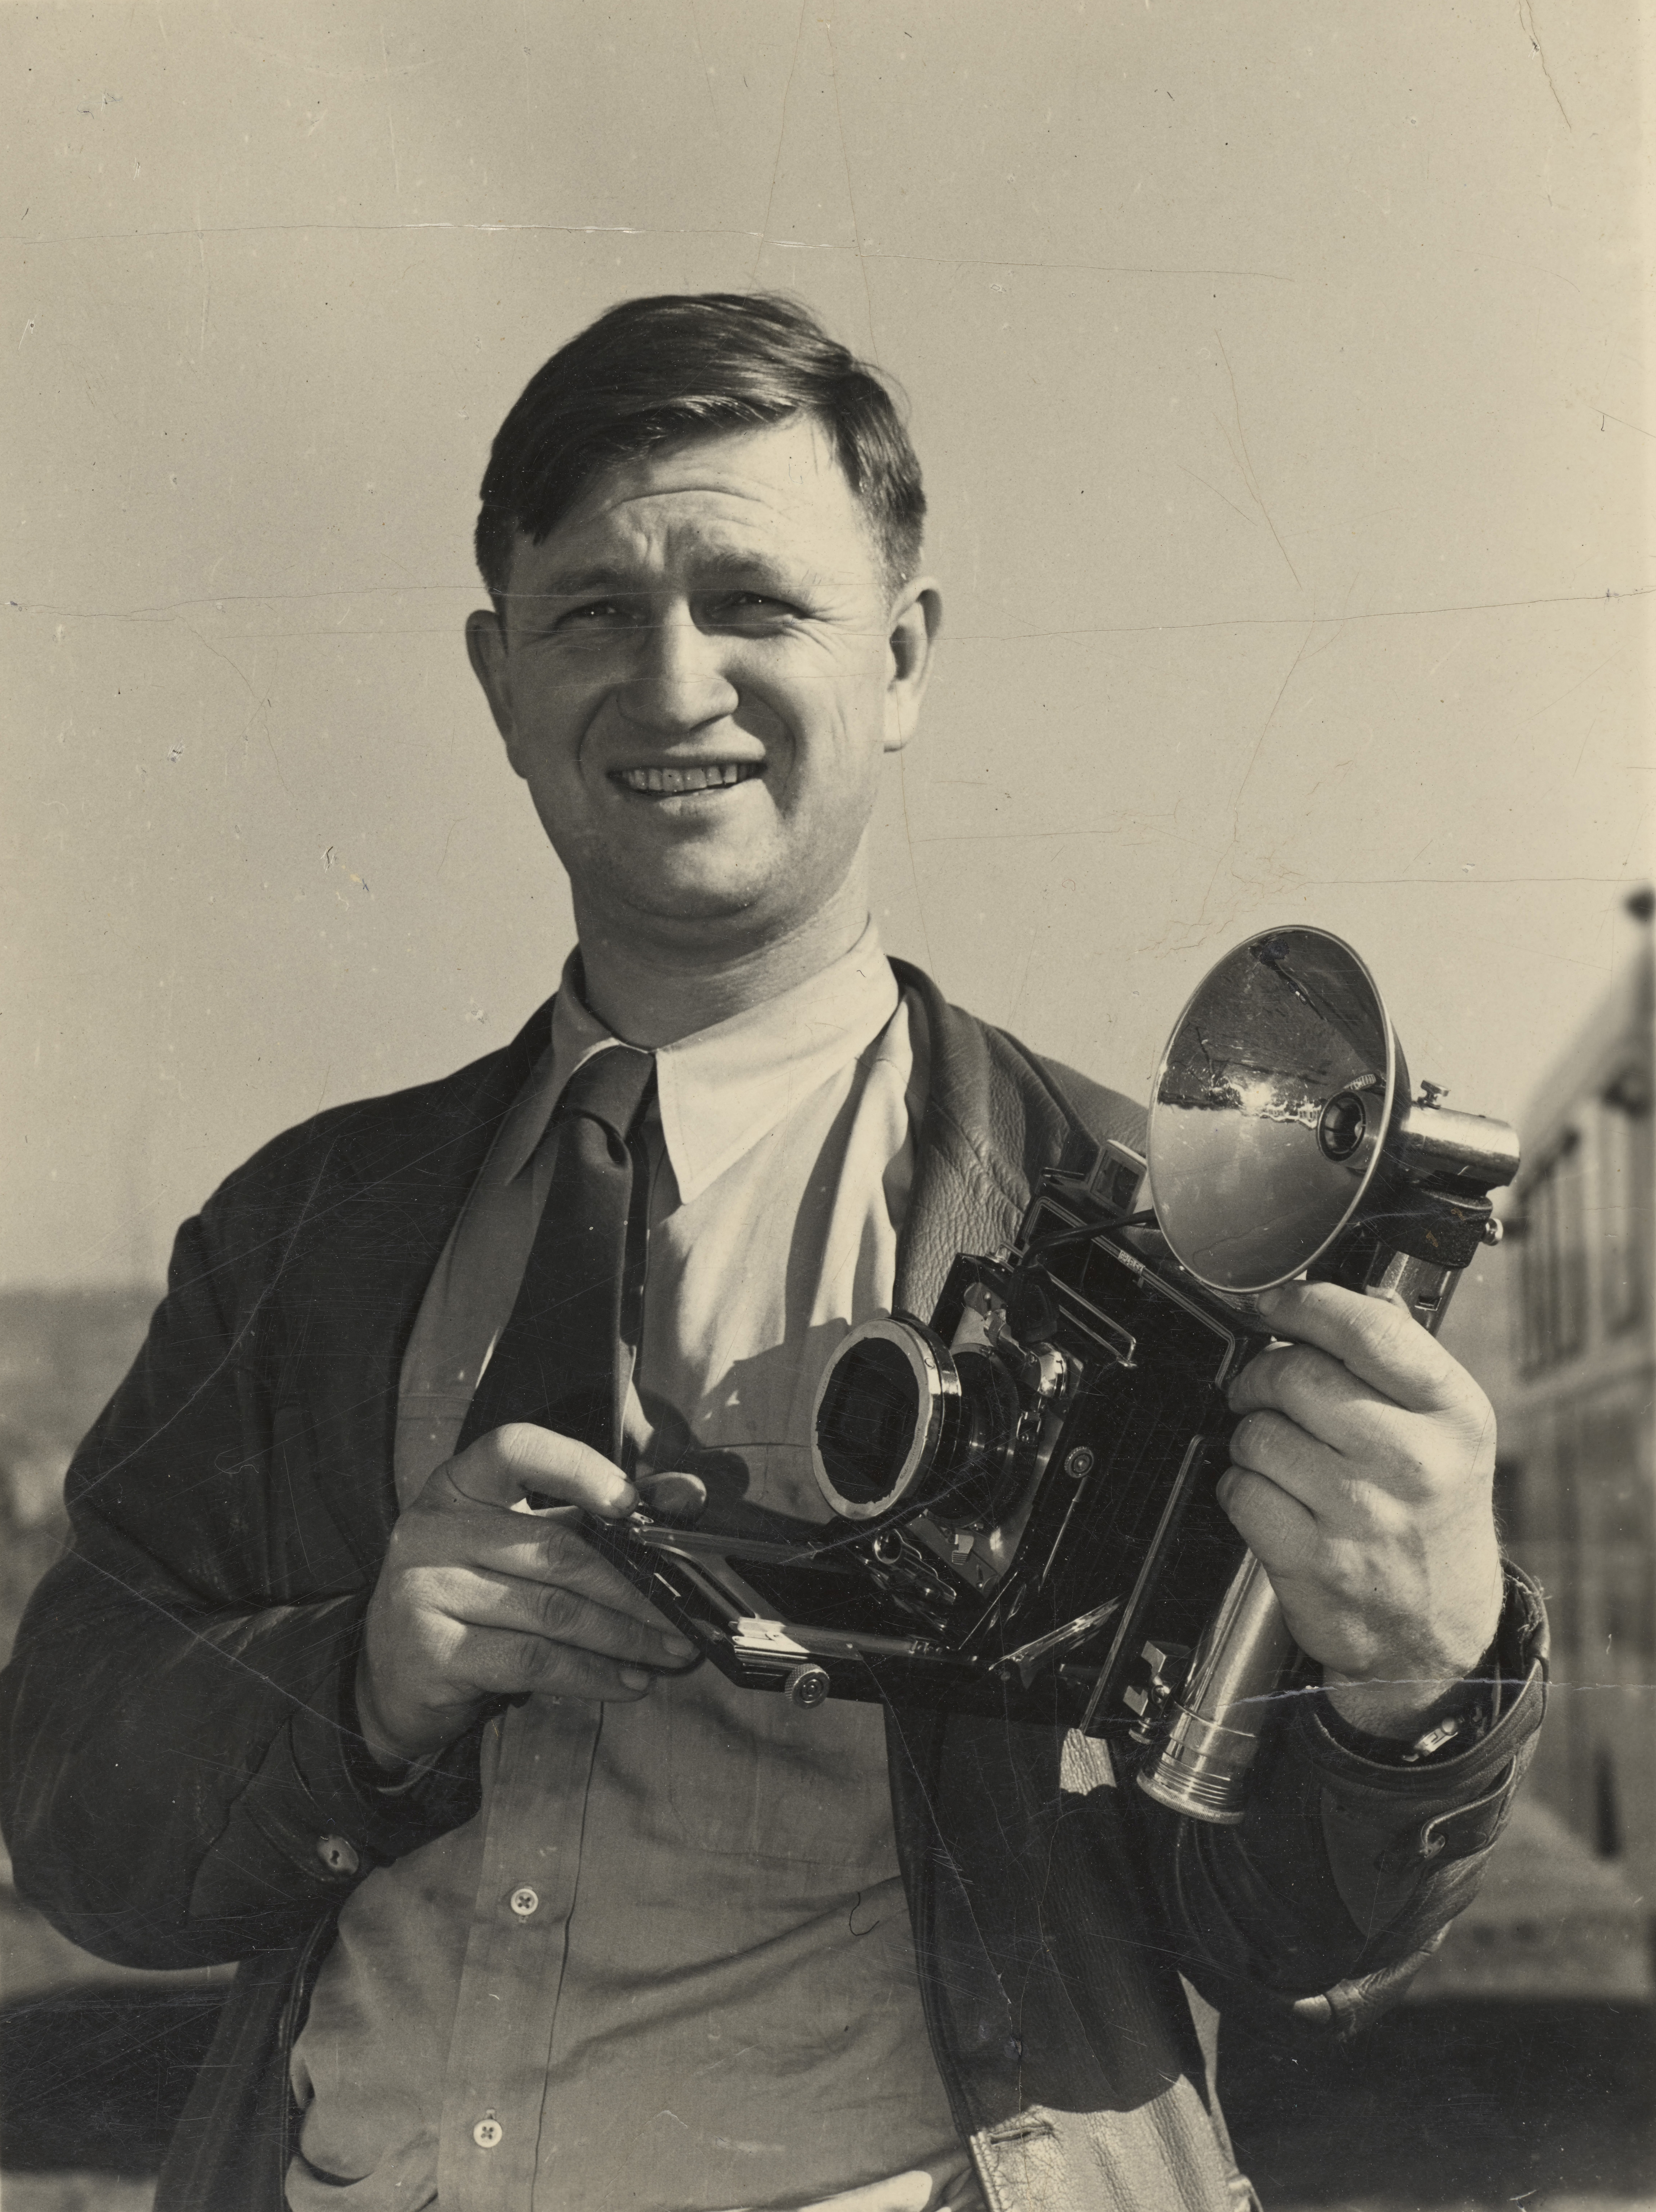 Man standing with camera.